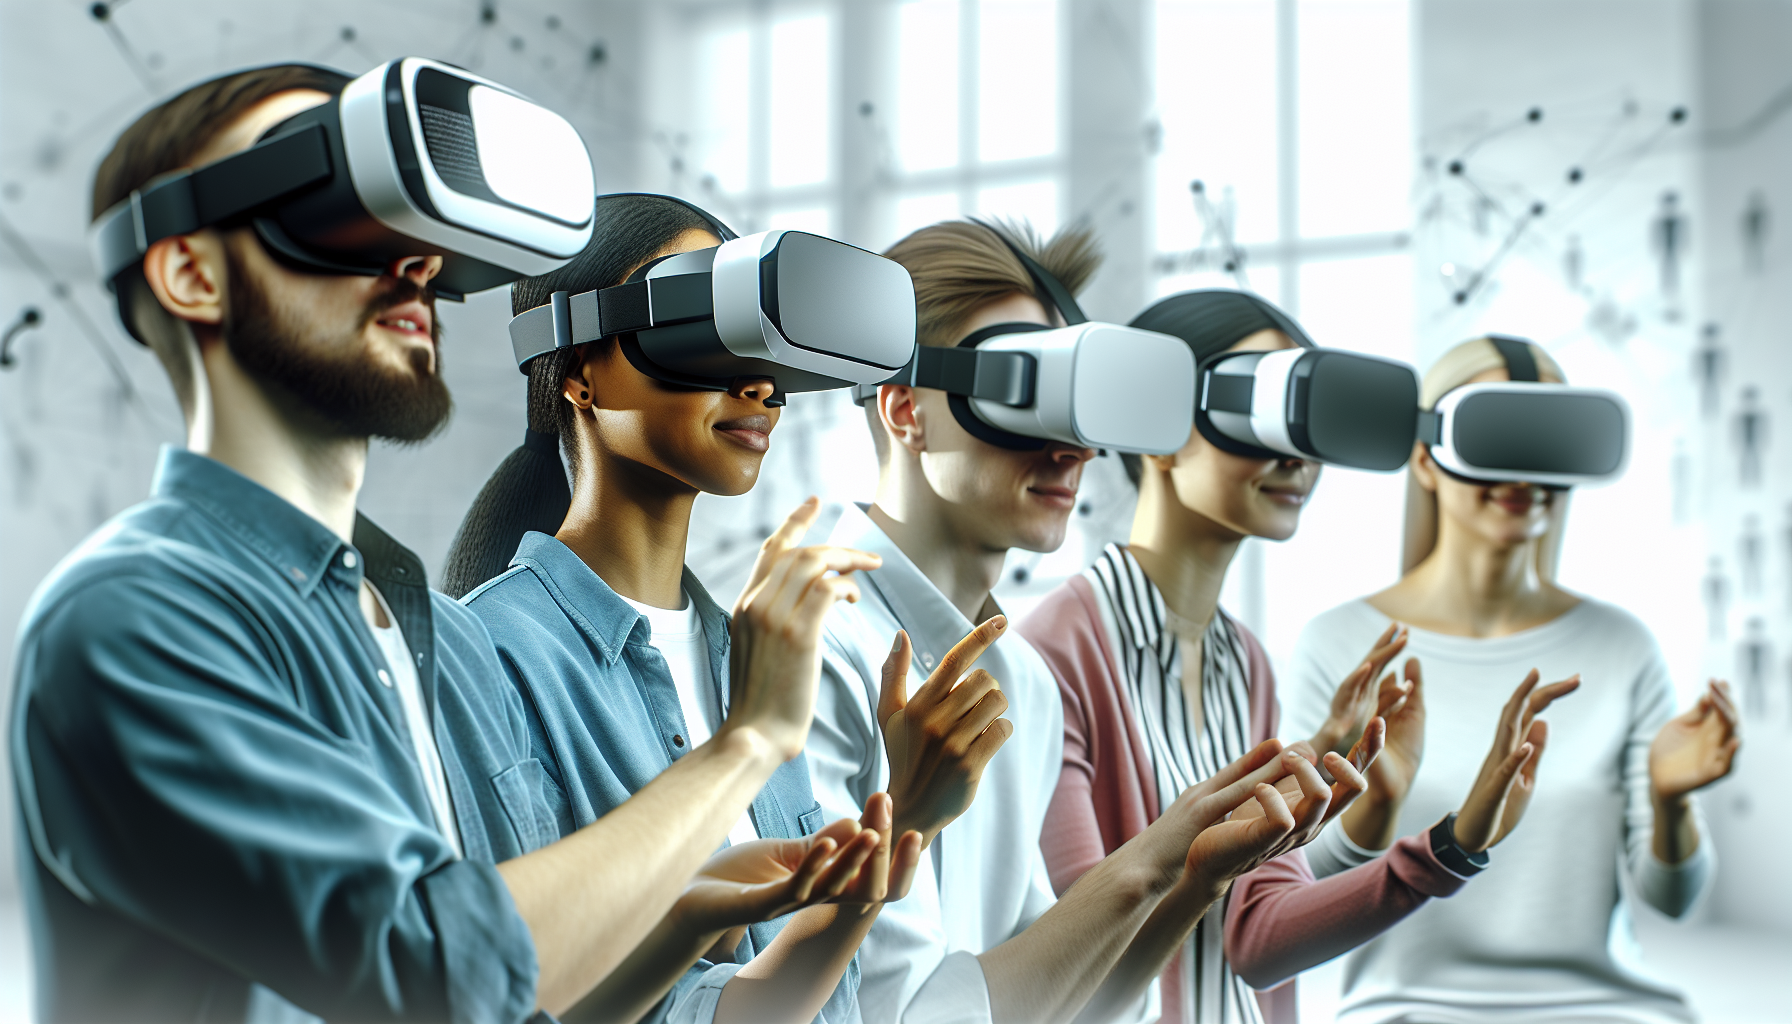 Implementing VR Team Building in Your Organization